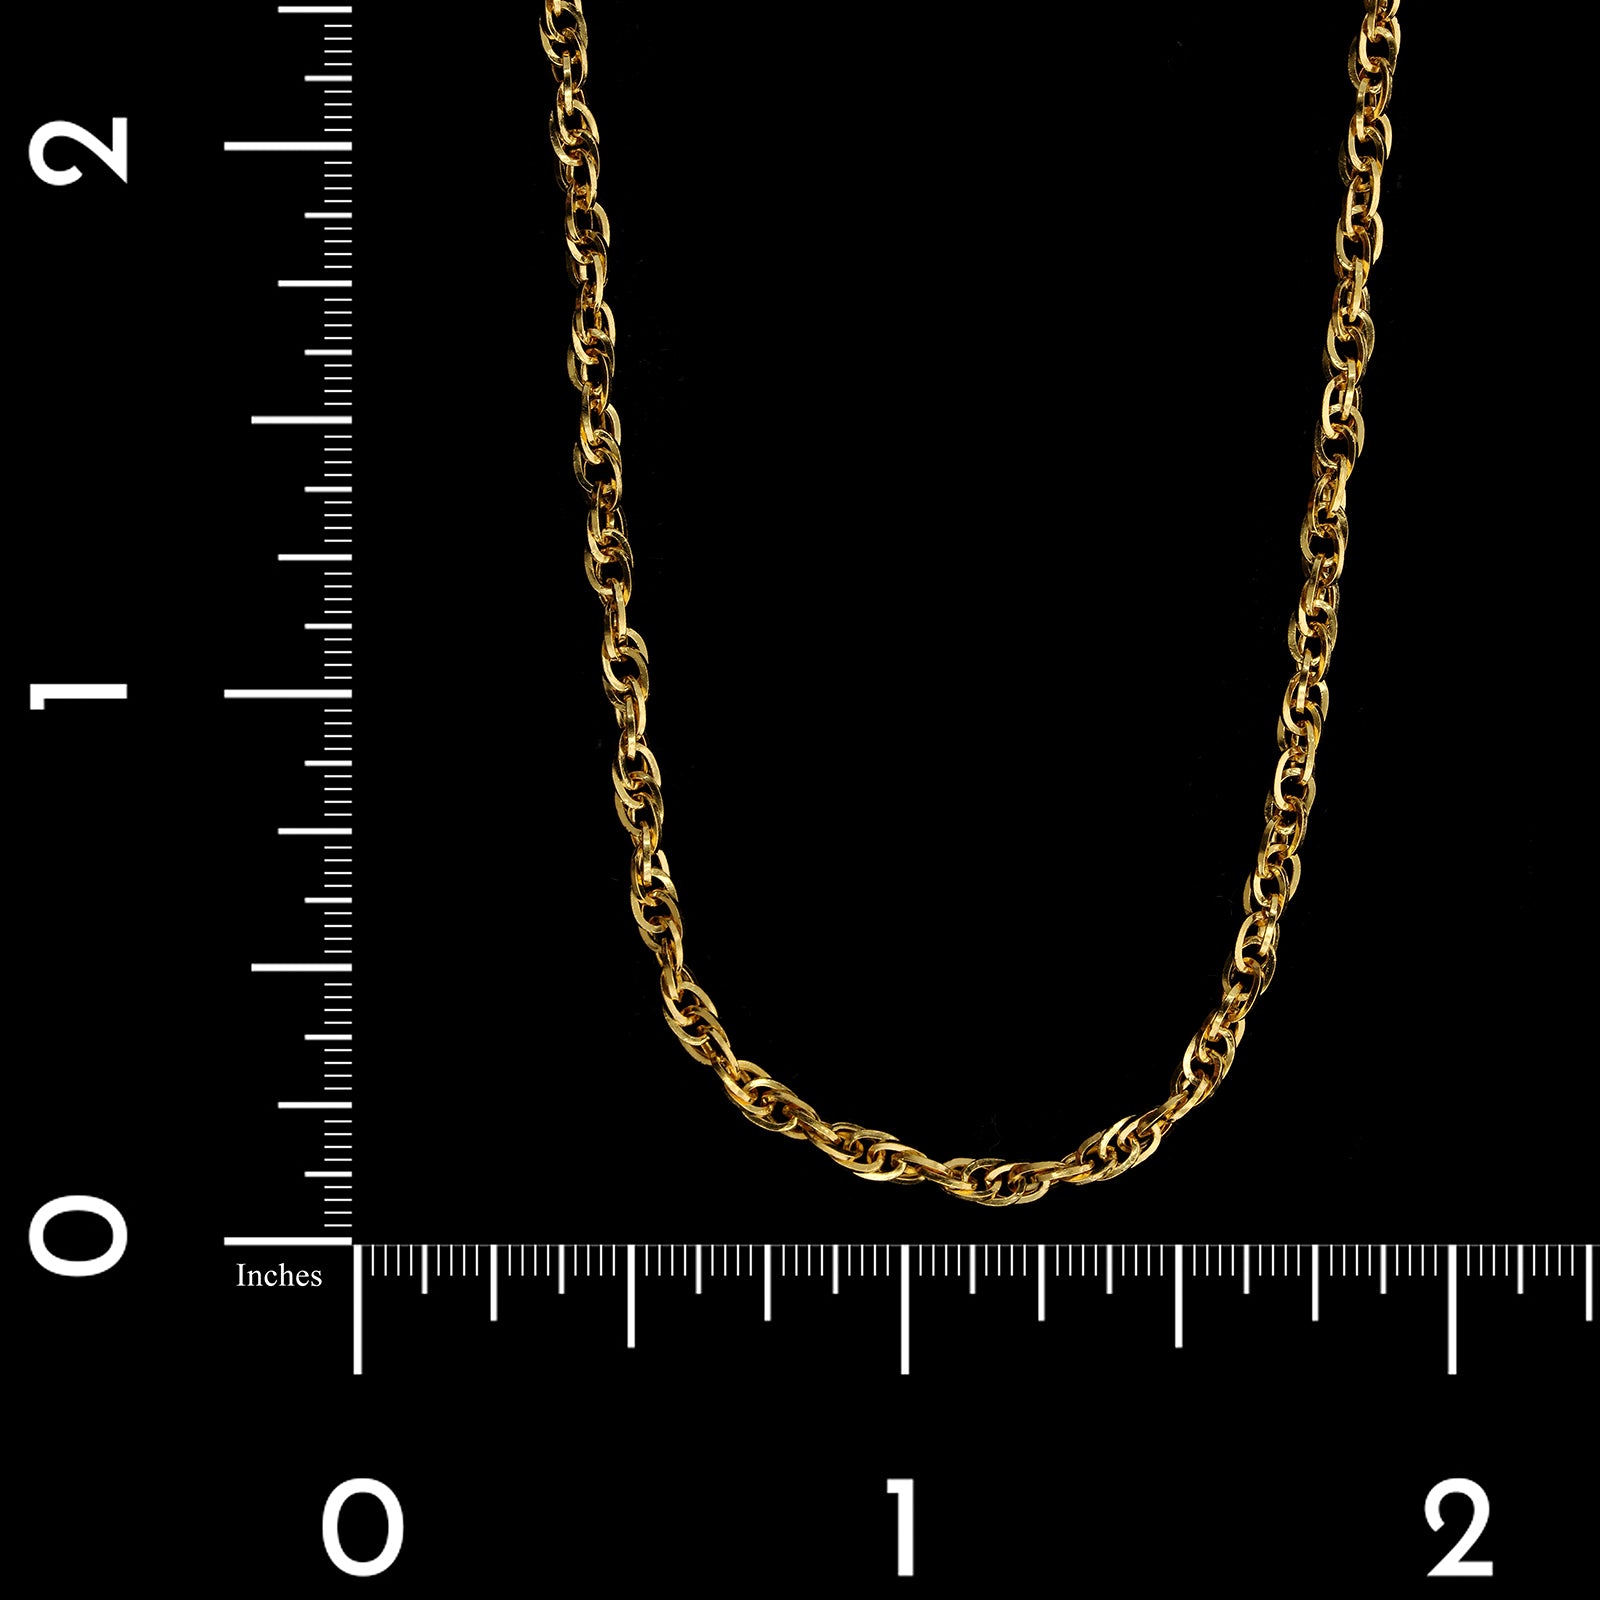 24K Yellow Gold Estate Rope Chain